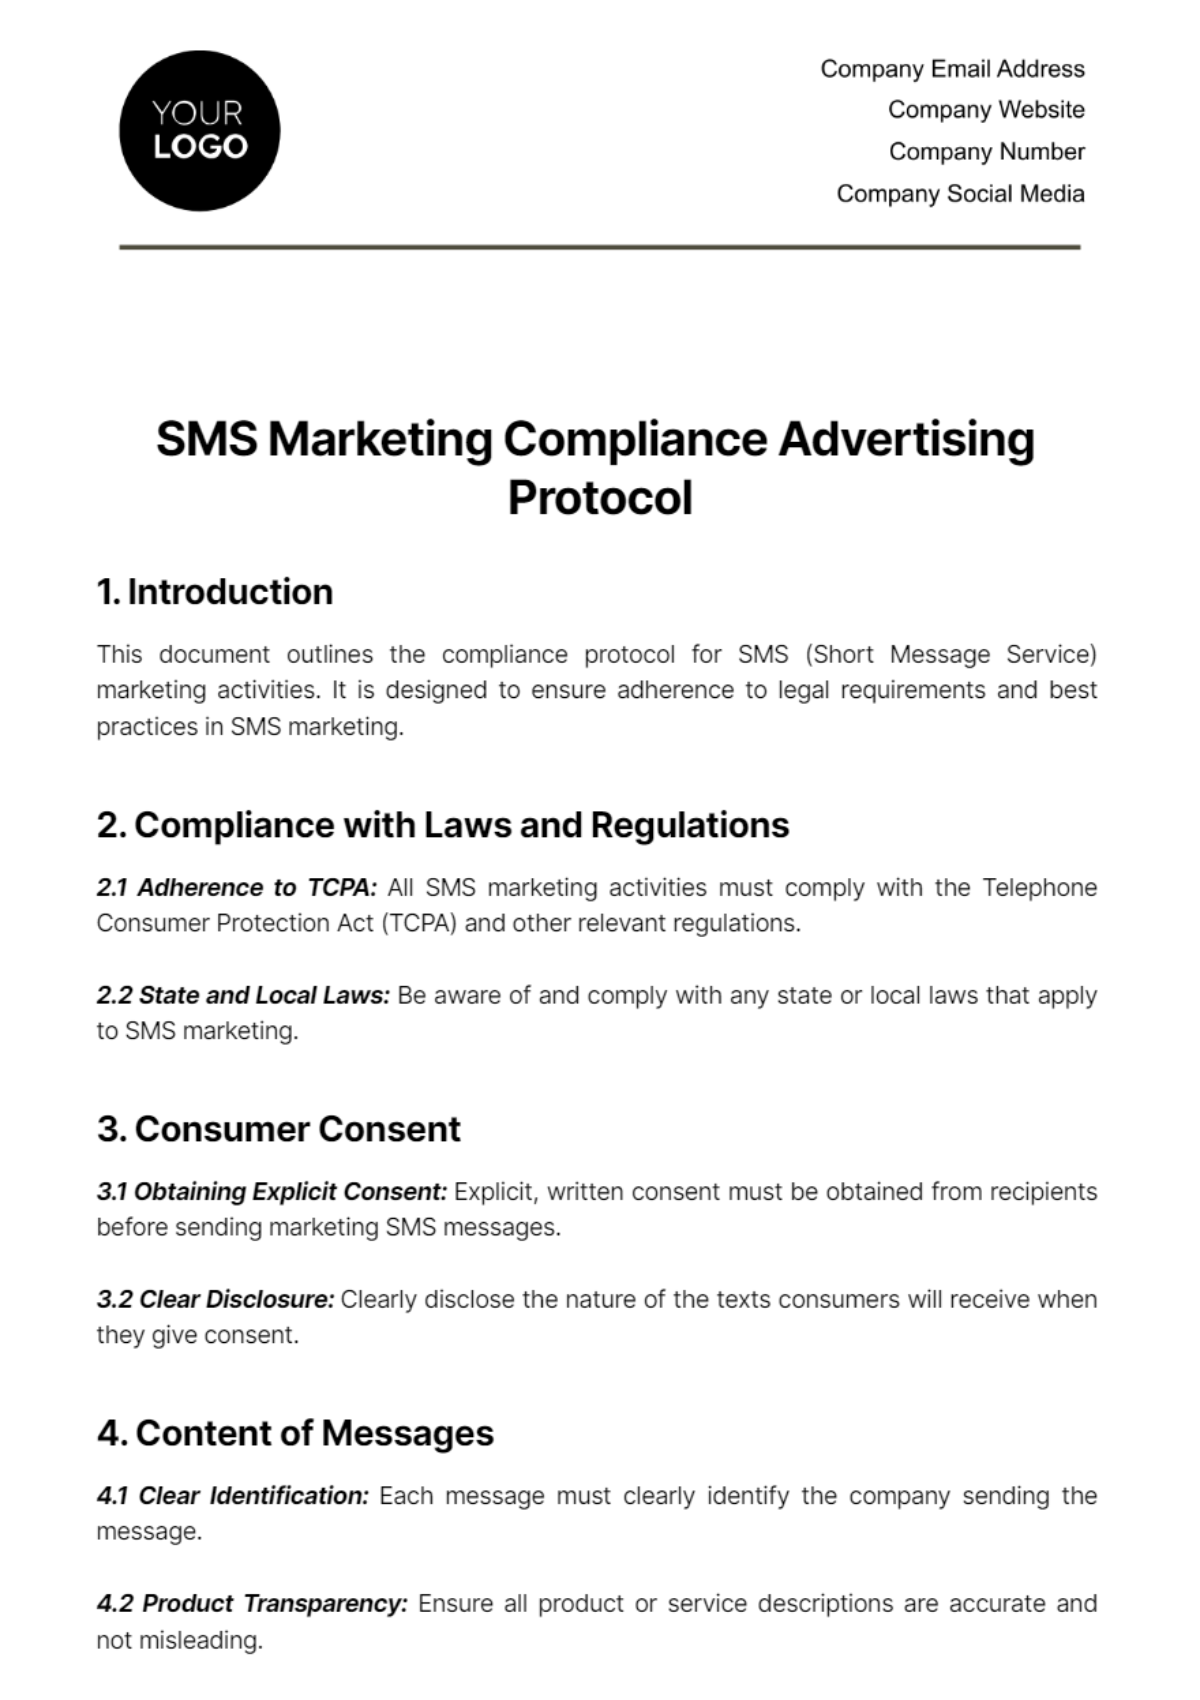 SMS Marketing Compliance Advertising Protocol Template